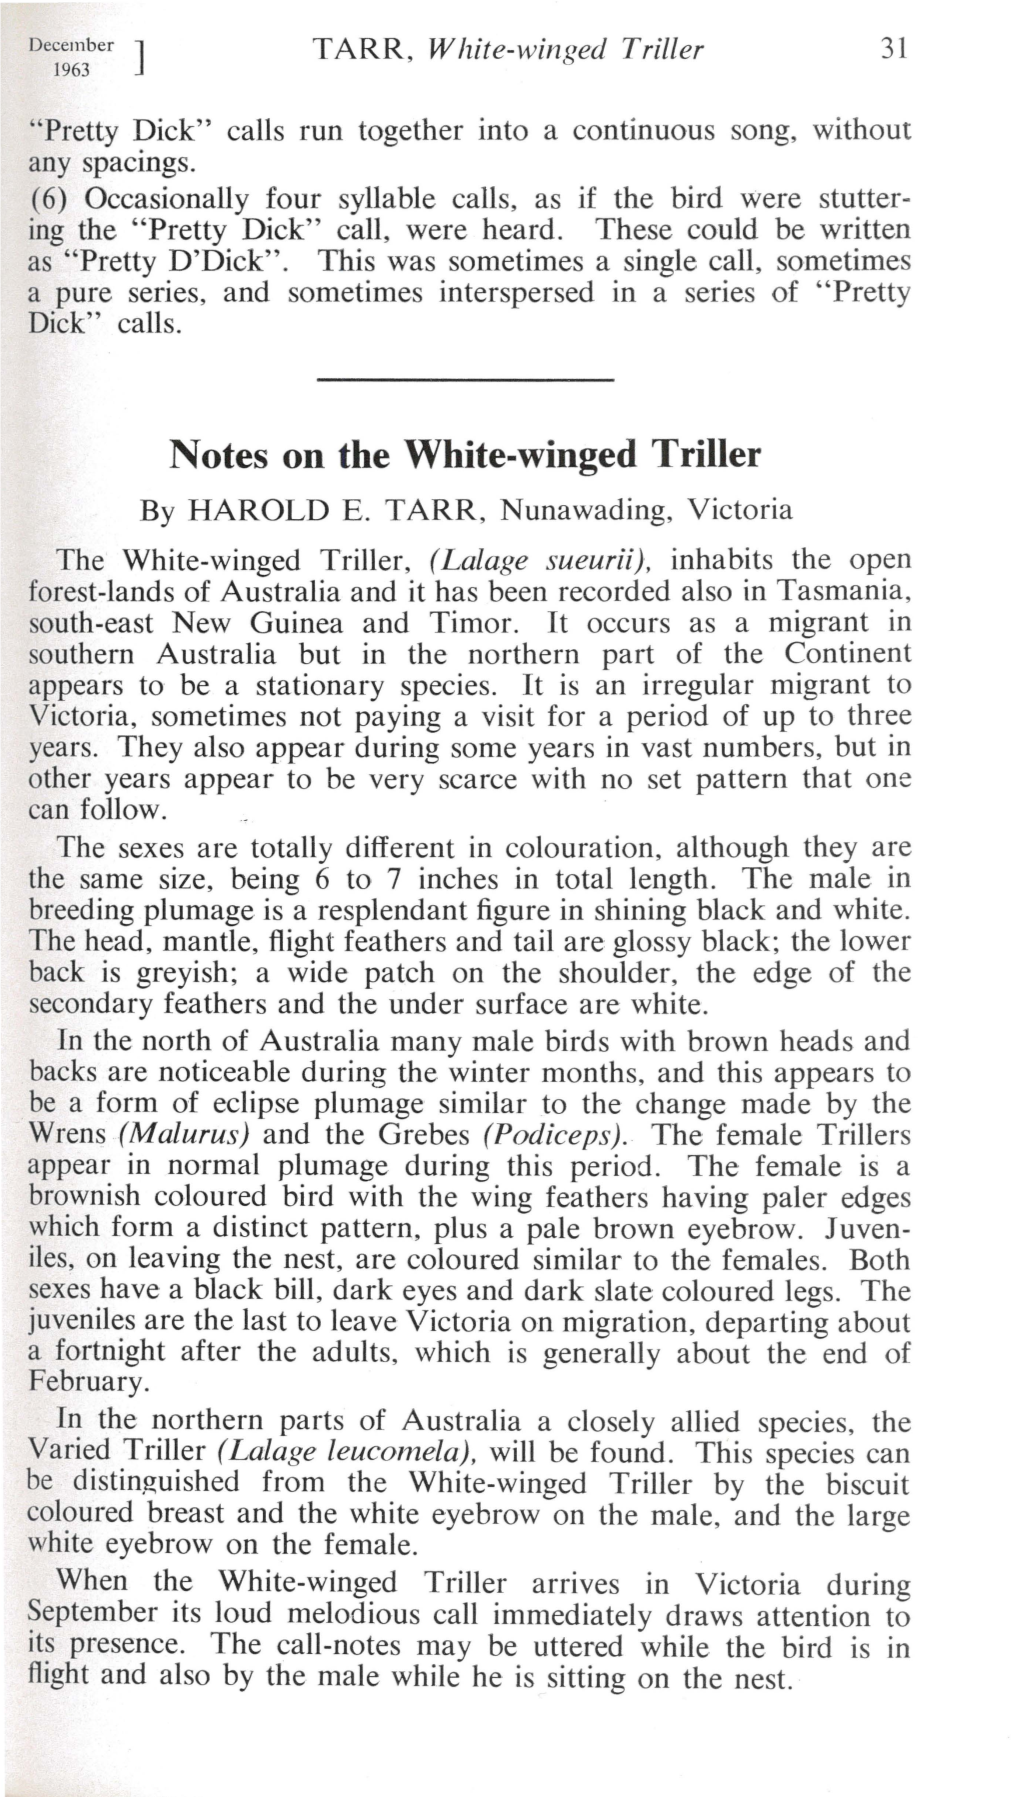 Notes on the White-Winged Triller by HAROLD E